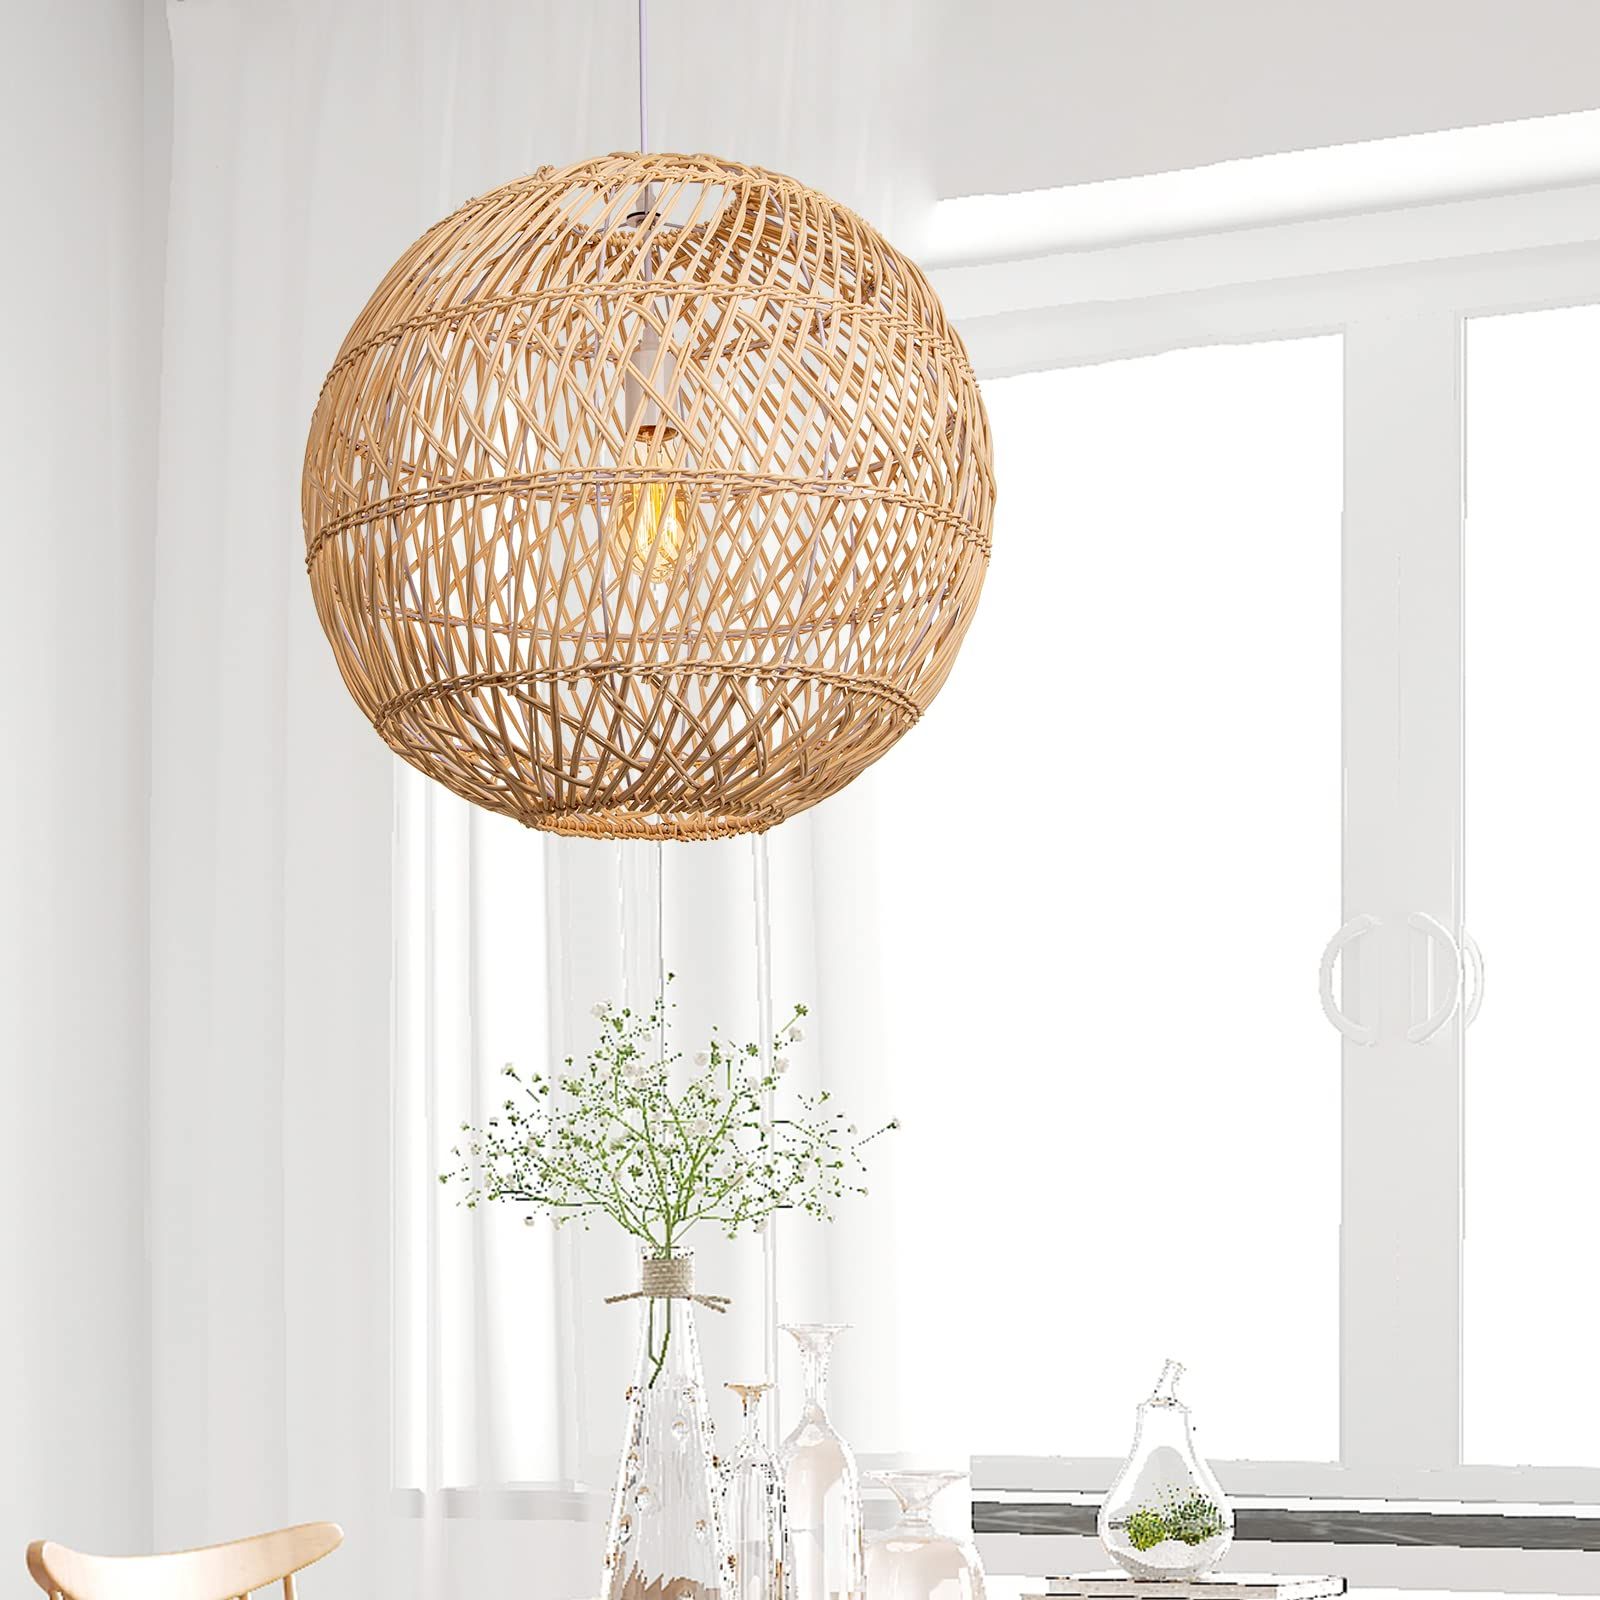 2019 Natural Rattan Lantern Chandeliers Intended For Arturesthome Natural Rattan Pendant Light, Woven Lantern Chandelier Pendant  Lamp Shade, Hanging Ceiling Light, Handmade Lampshade – – Amazon (View 2 of 15)